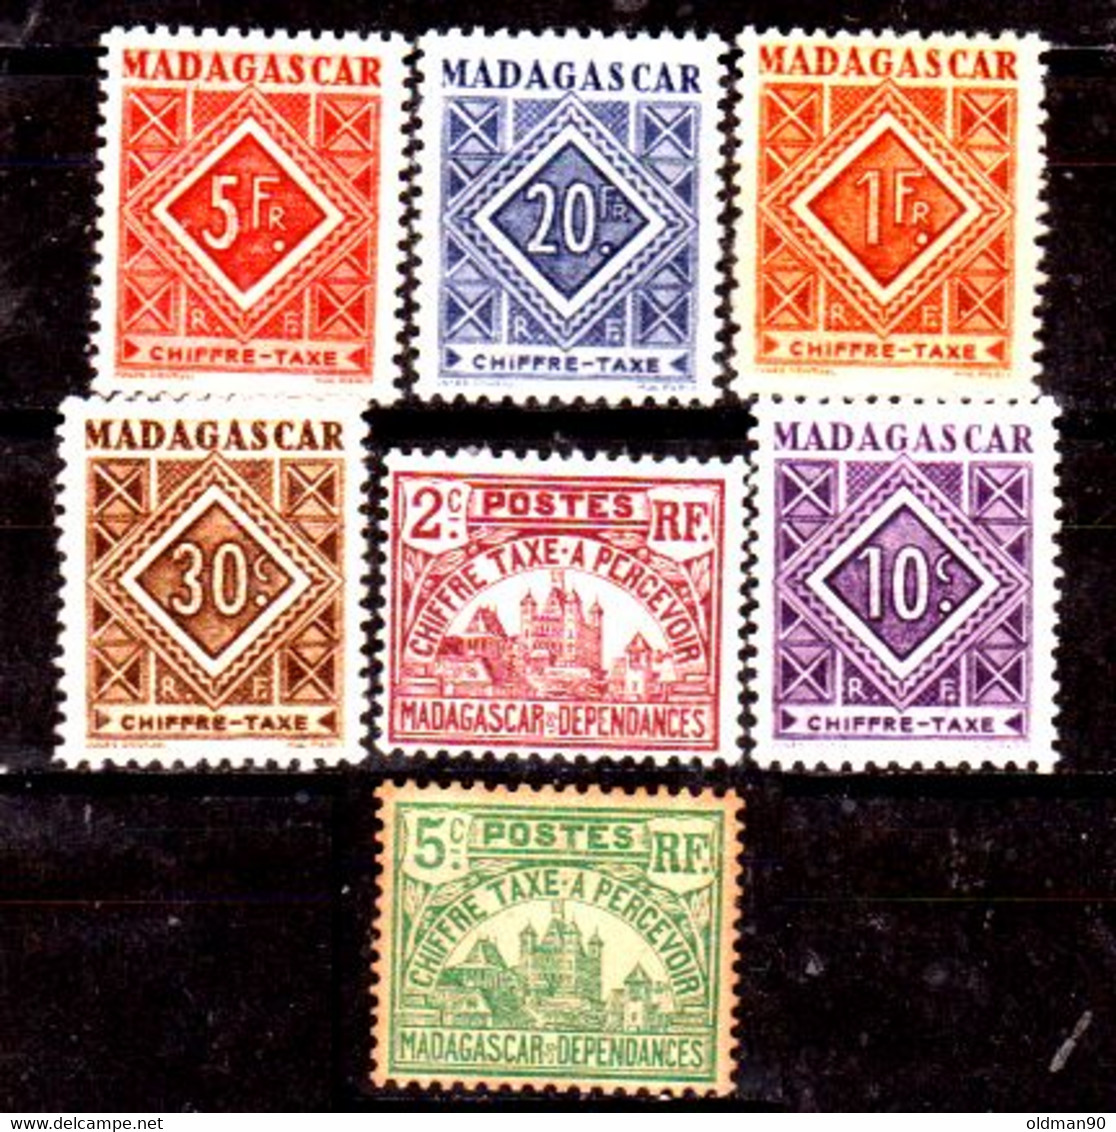 Madagascar -137- POSTAGE DUE STAMPS, Issued By 1908-1962 - Quality In Your Opinion. - Timbres-taxe